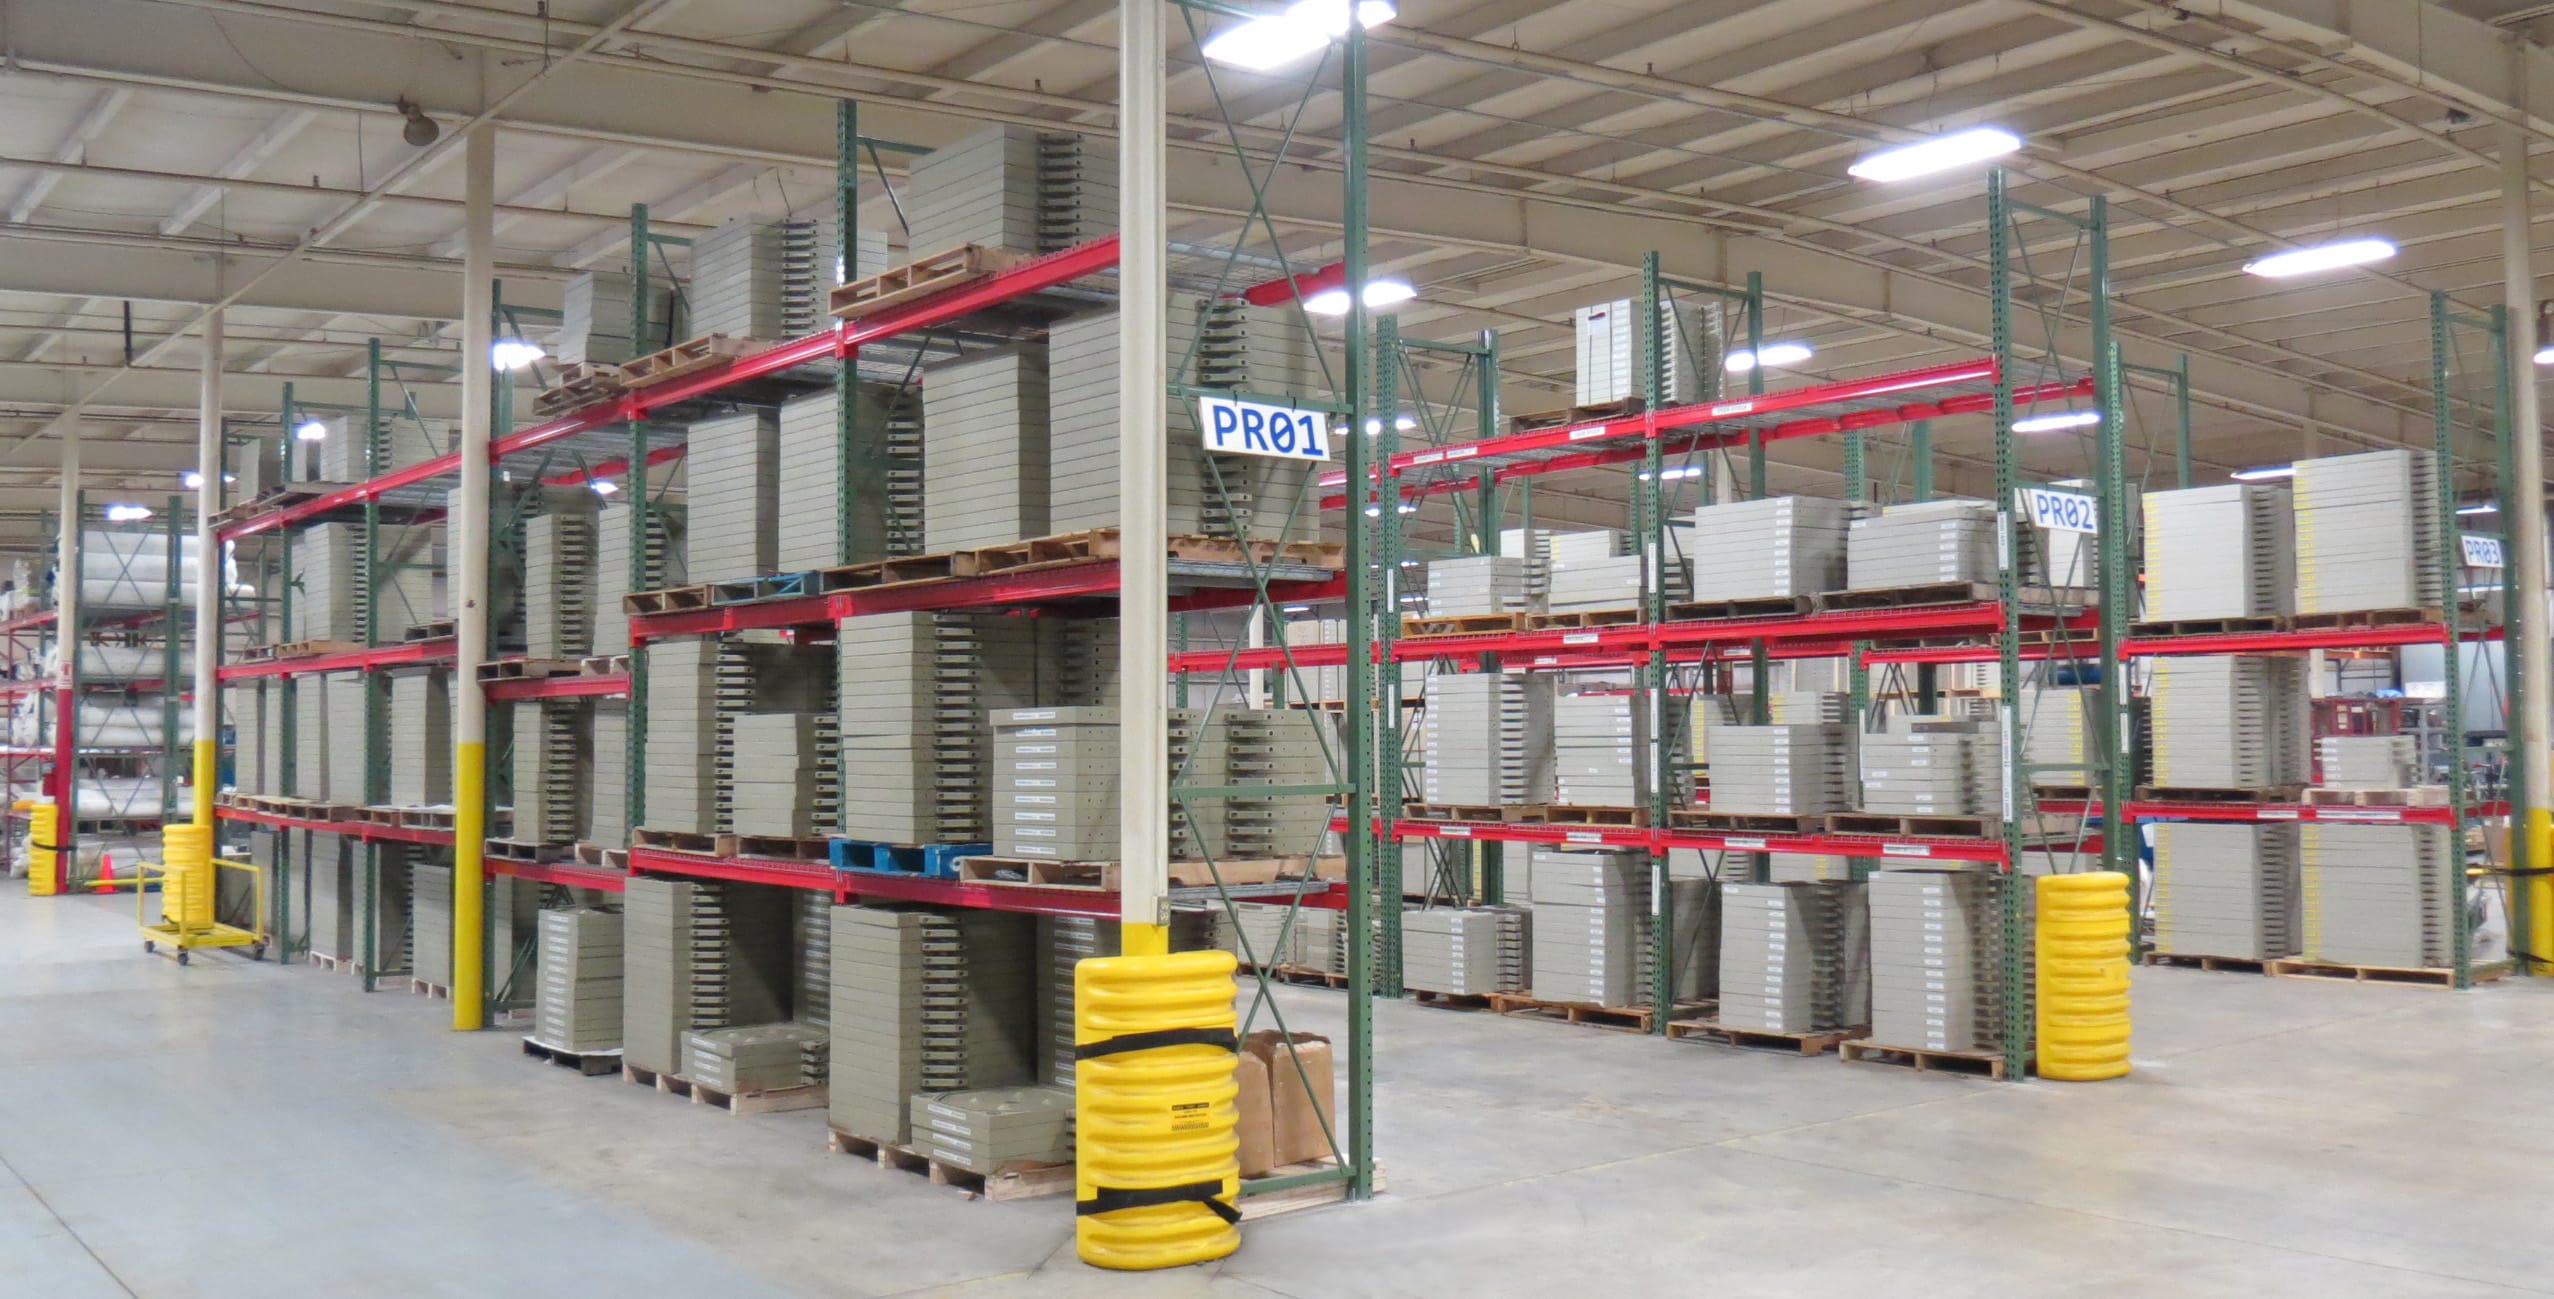 M.W. Watermark Stocks an Extensive Inventory of Filter Plates to Get You Up and Running Quickly